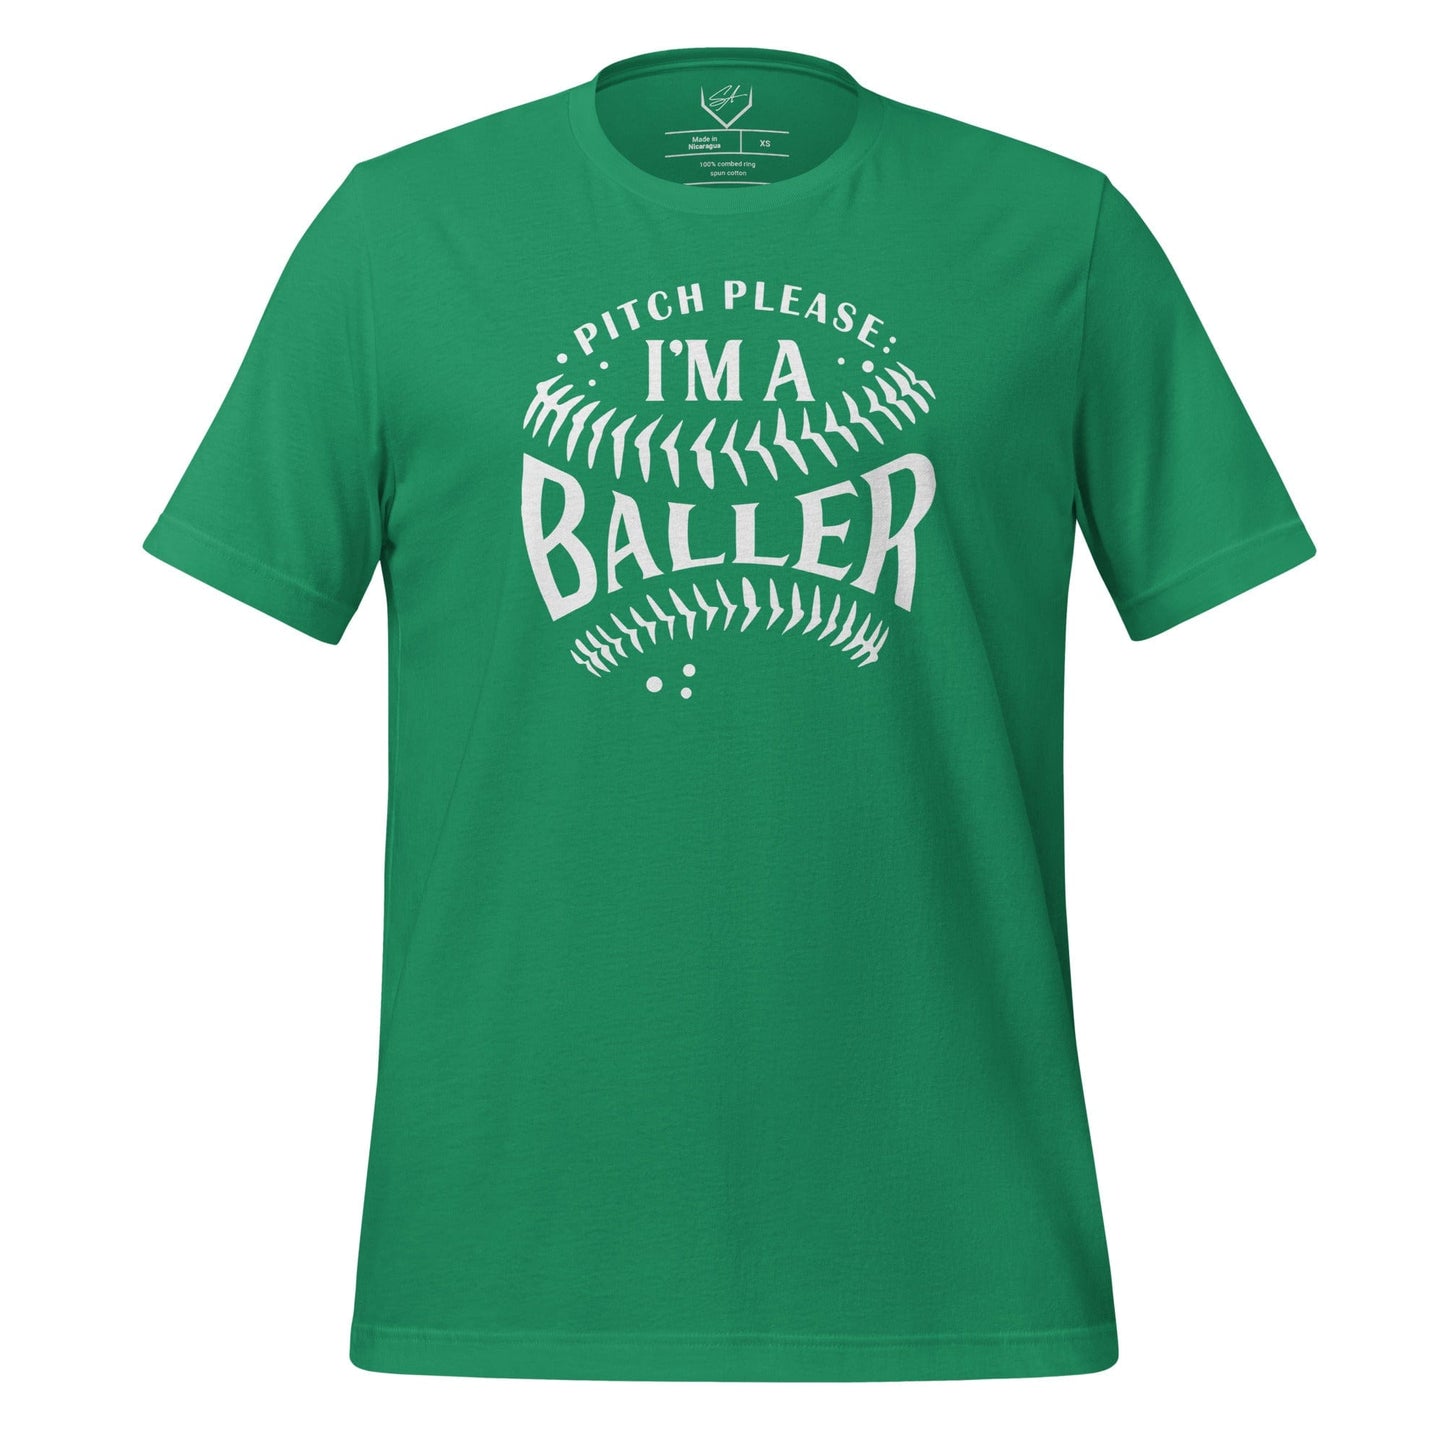 Pitch Please I'm A Baller - Adult Tee